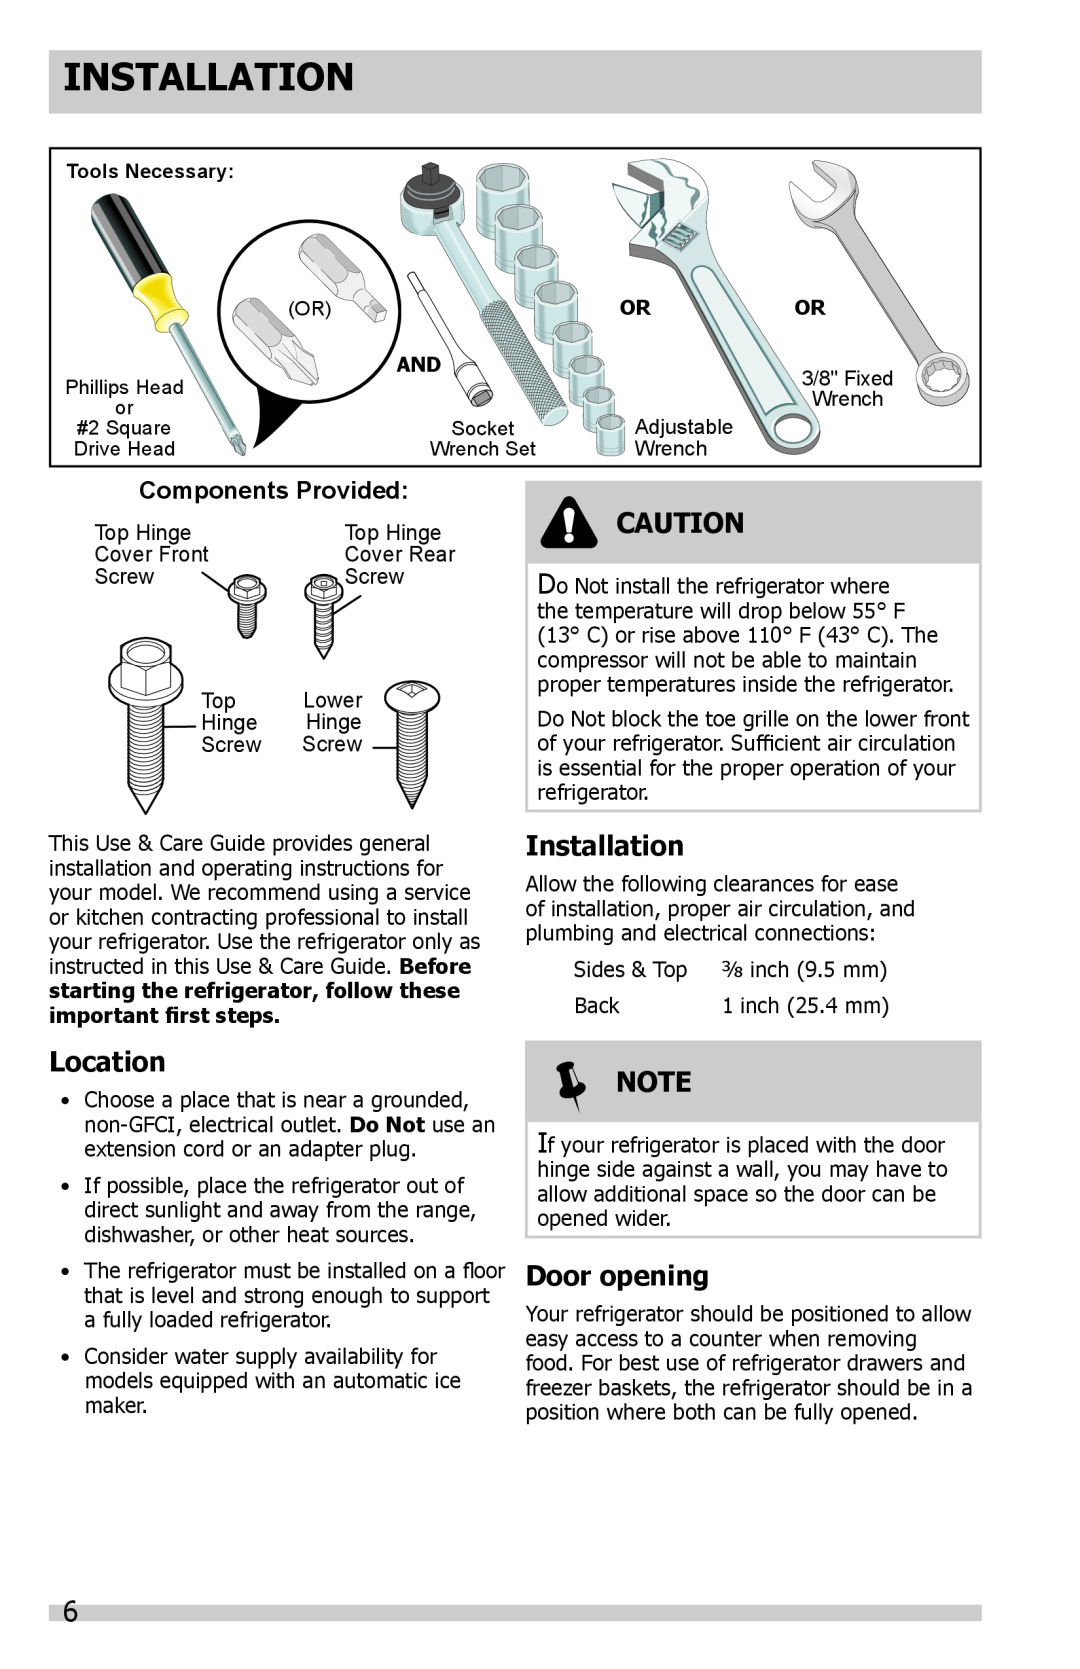 Frigidaire DGHF2360PF important safety instructions Installation, Location, Note, Door opening, Components Provided 